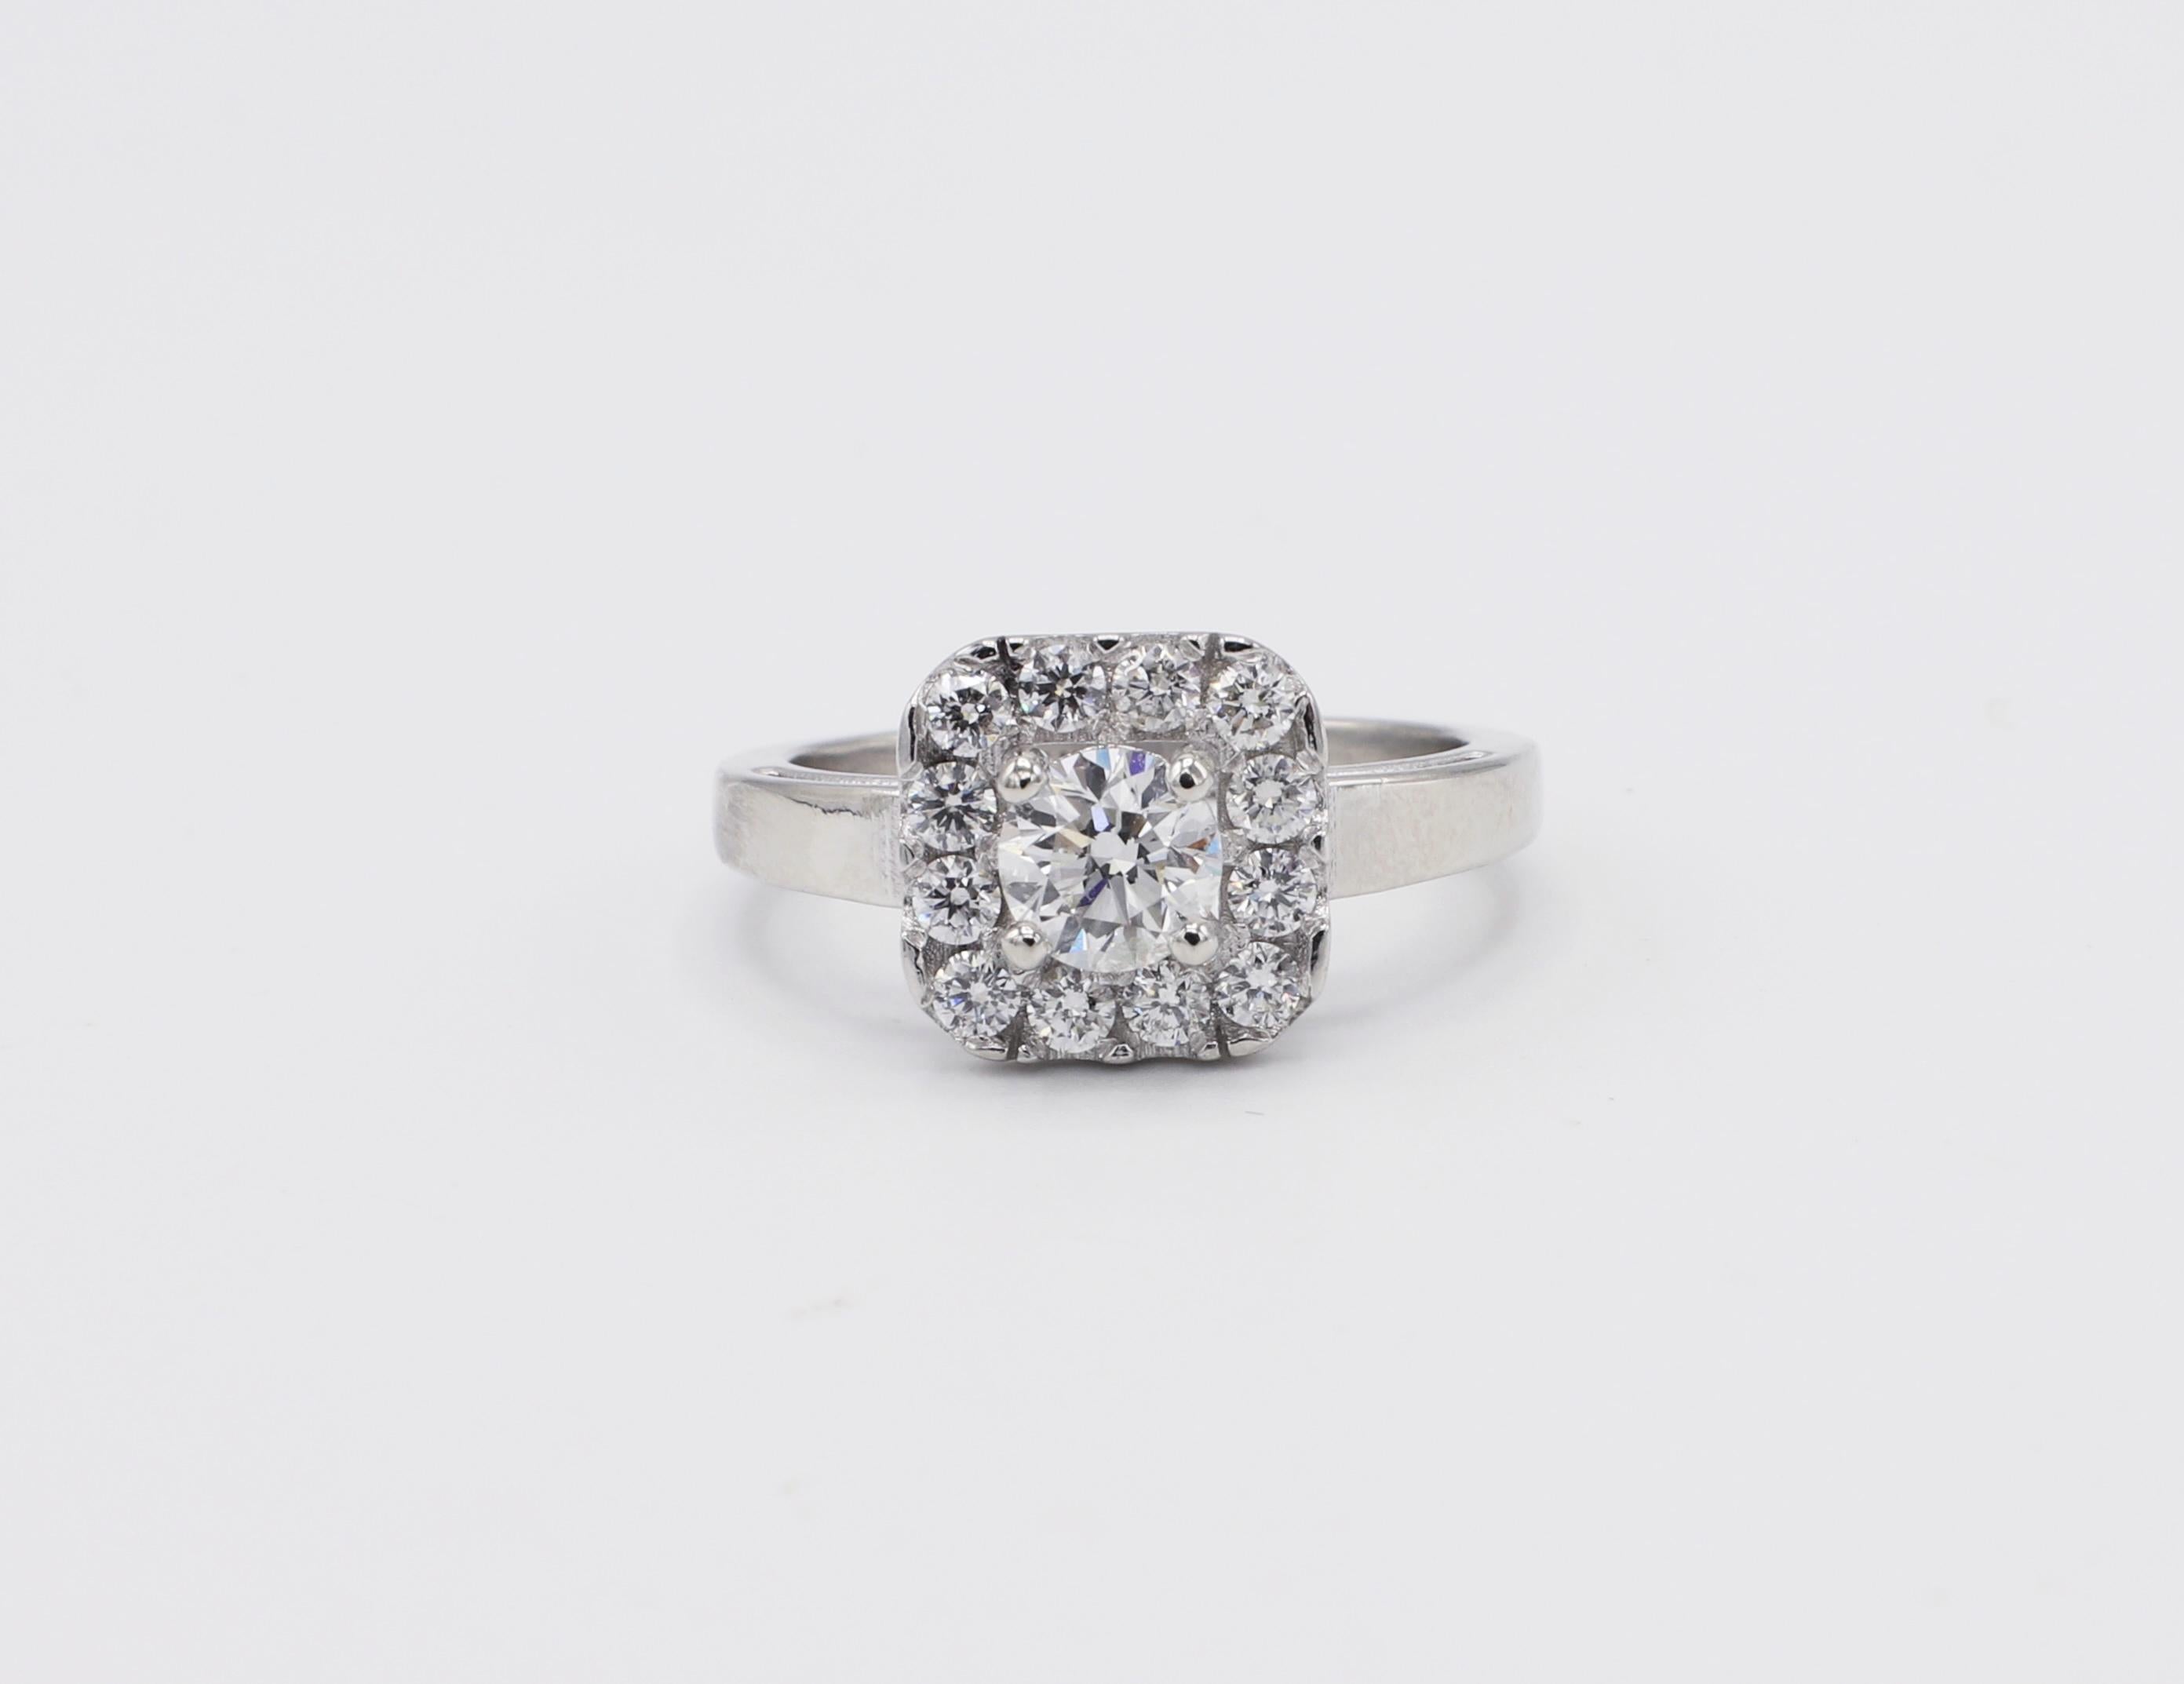 Platinum 1.10 CTW Round Diamond Halo Engagement Ring Size 6.5 
Metal: Platinum
Weight: 6.89 grams
Diamonds: Approx. 1.10 CTW G-H VS-SI, center stone is .60ct. 
Size: 6.5 (US)
Top of ring measures 10.5 x 10.5 mm
Band is 2mm at base
